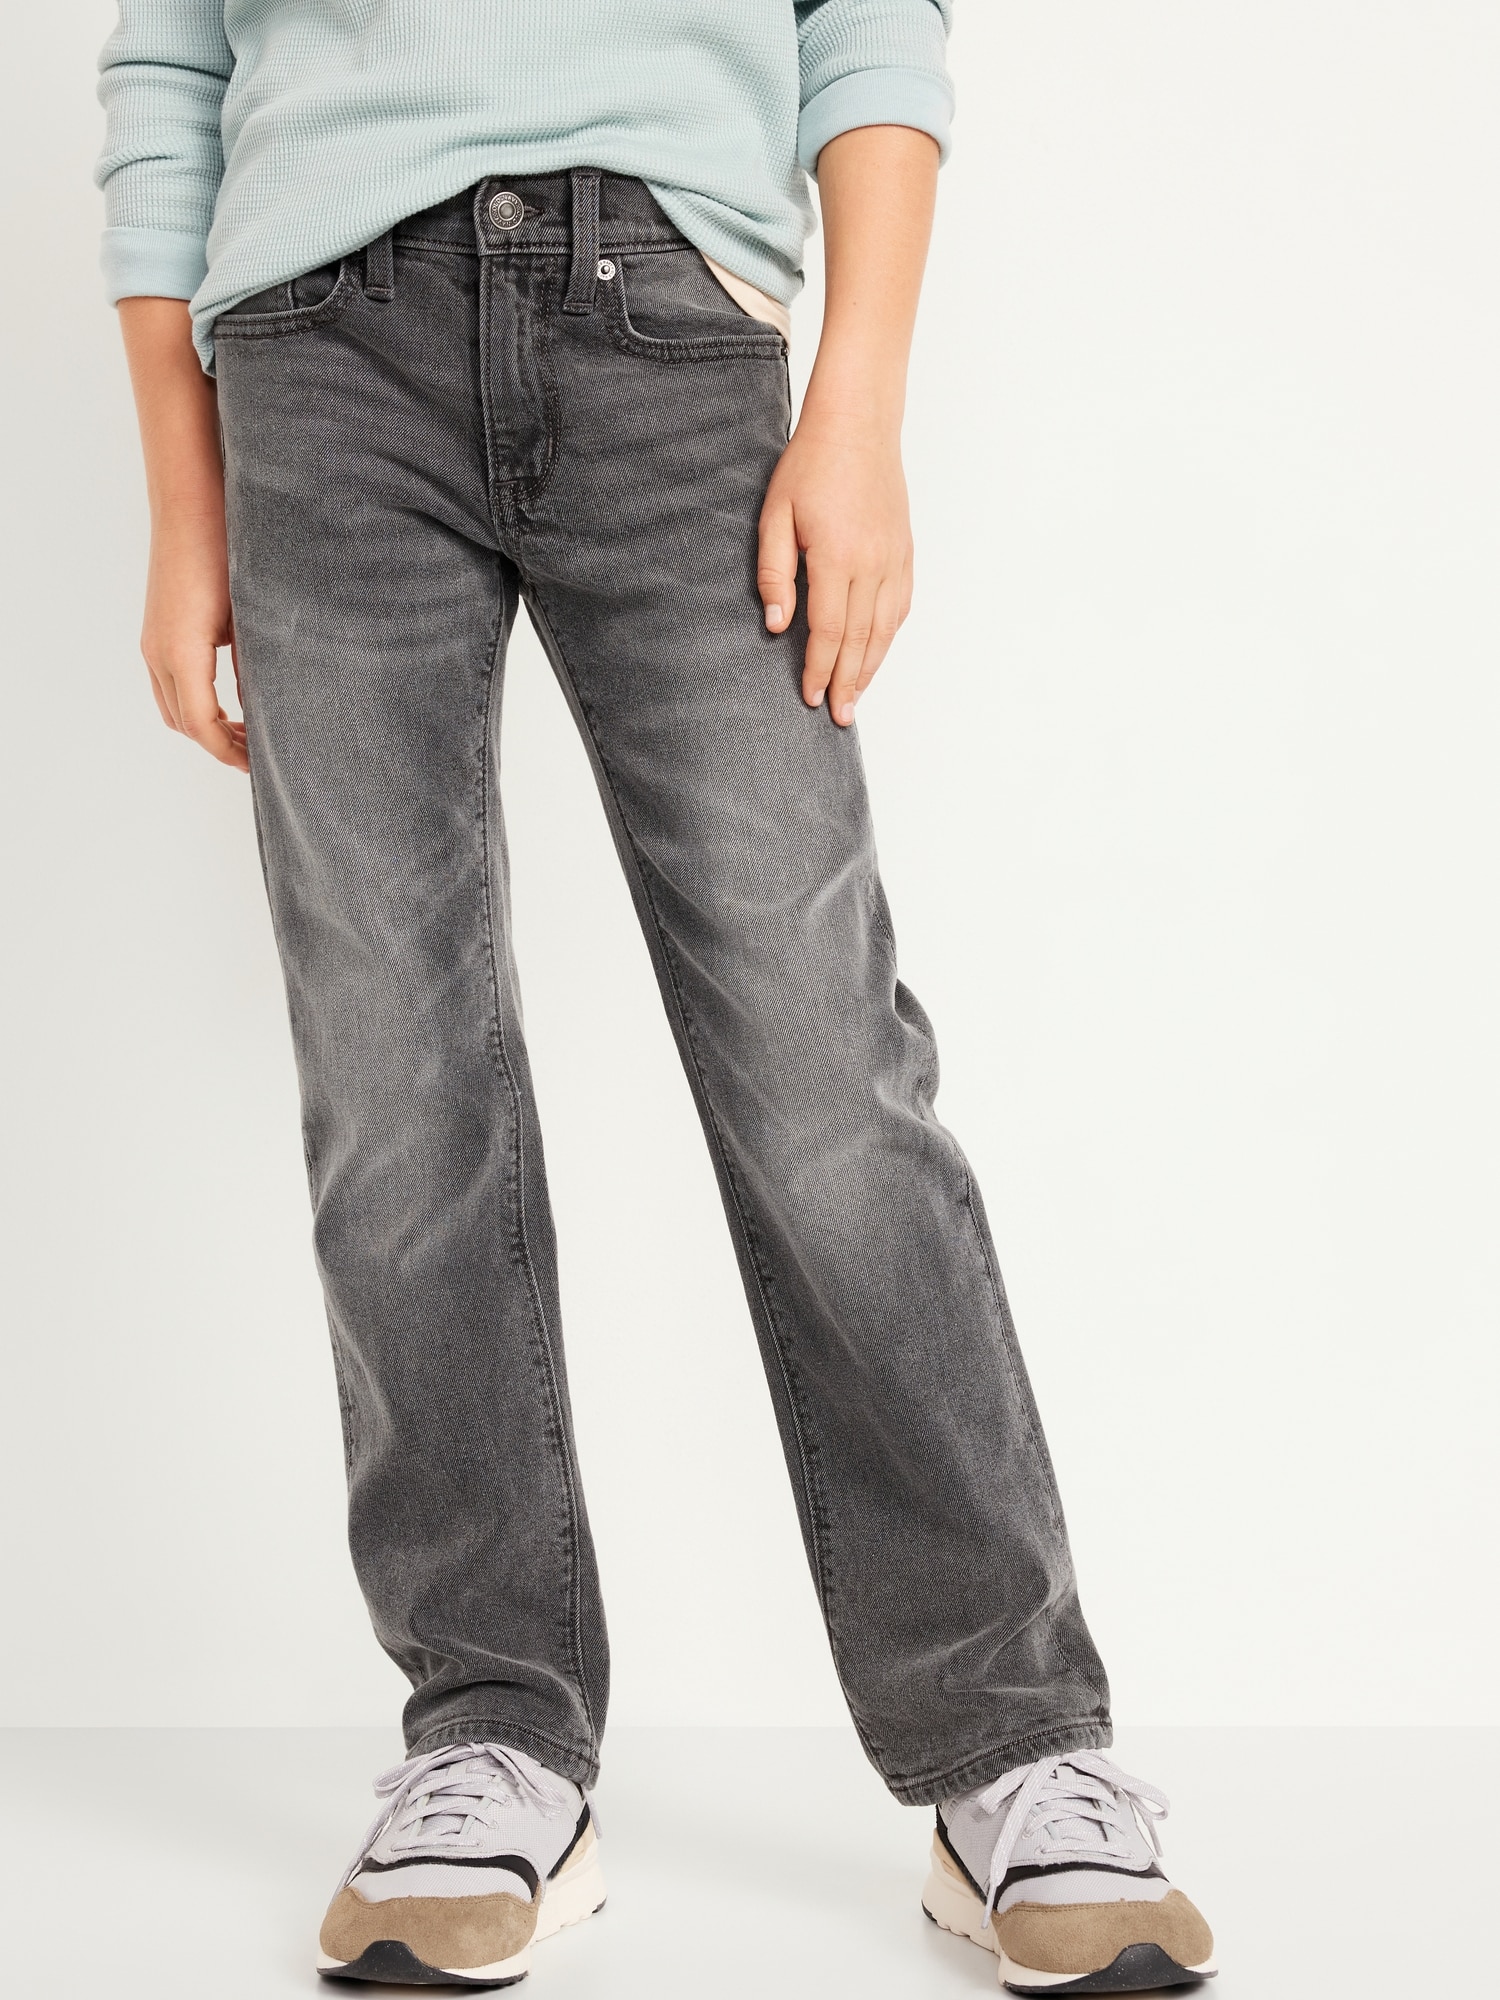 Straight Leg Jeans for Boys | Old Navy